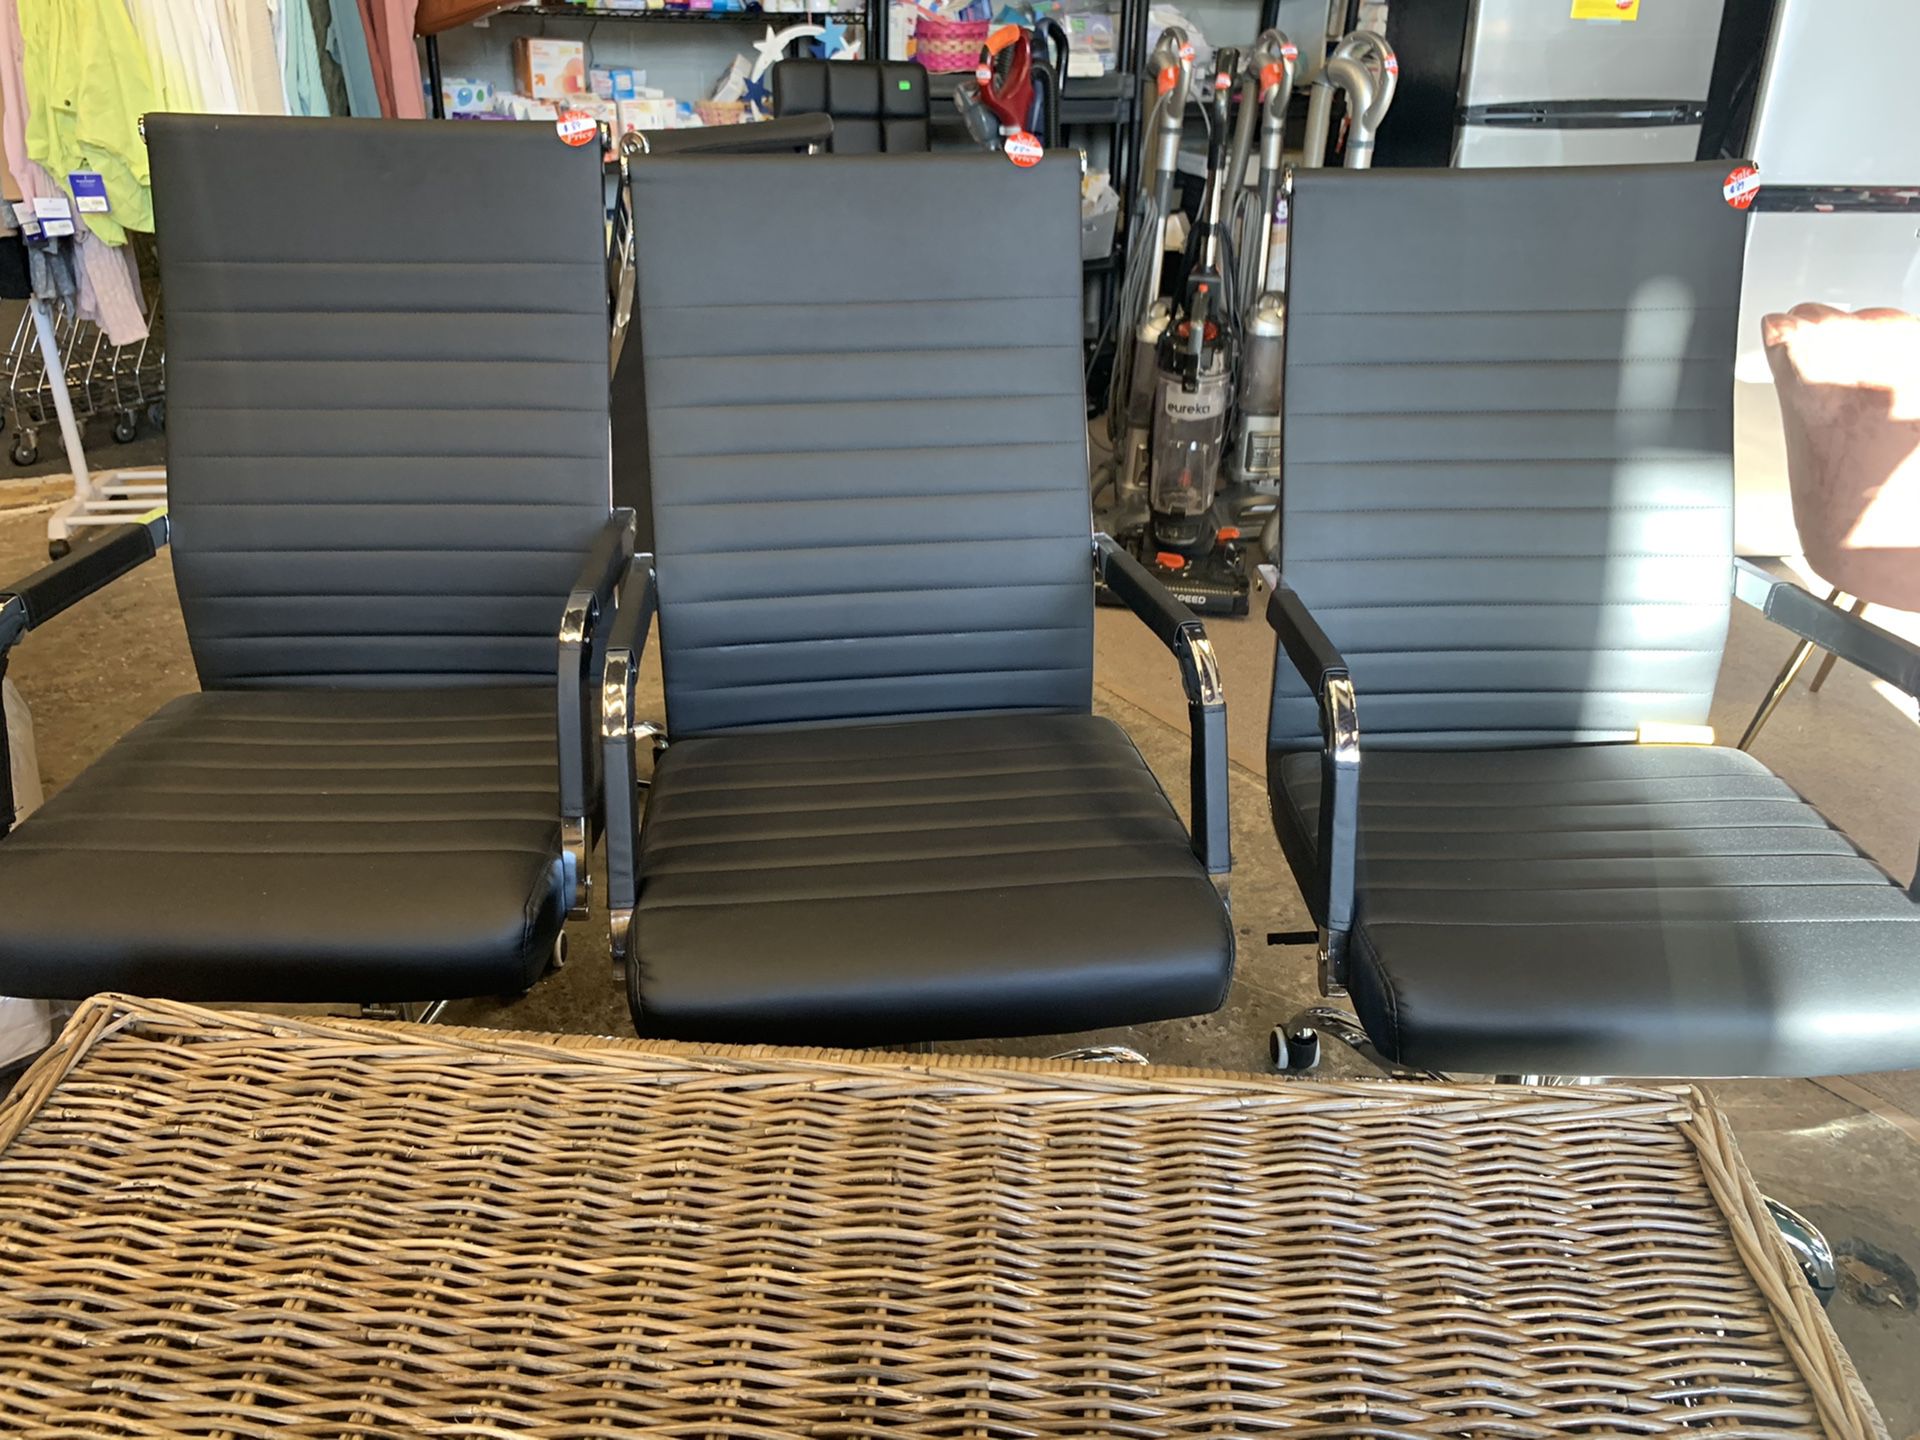 Office chairs black leather $69 each